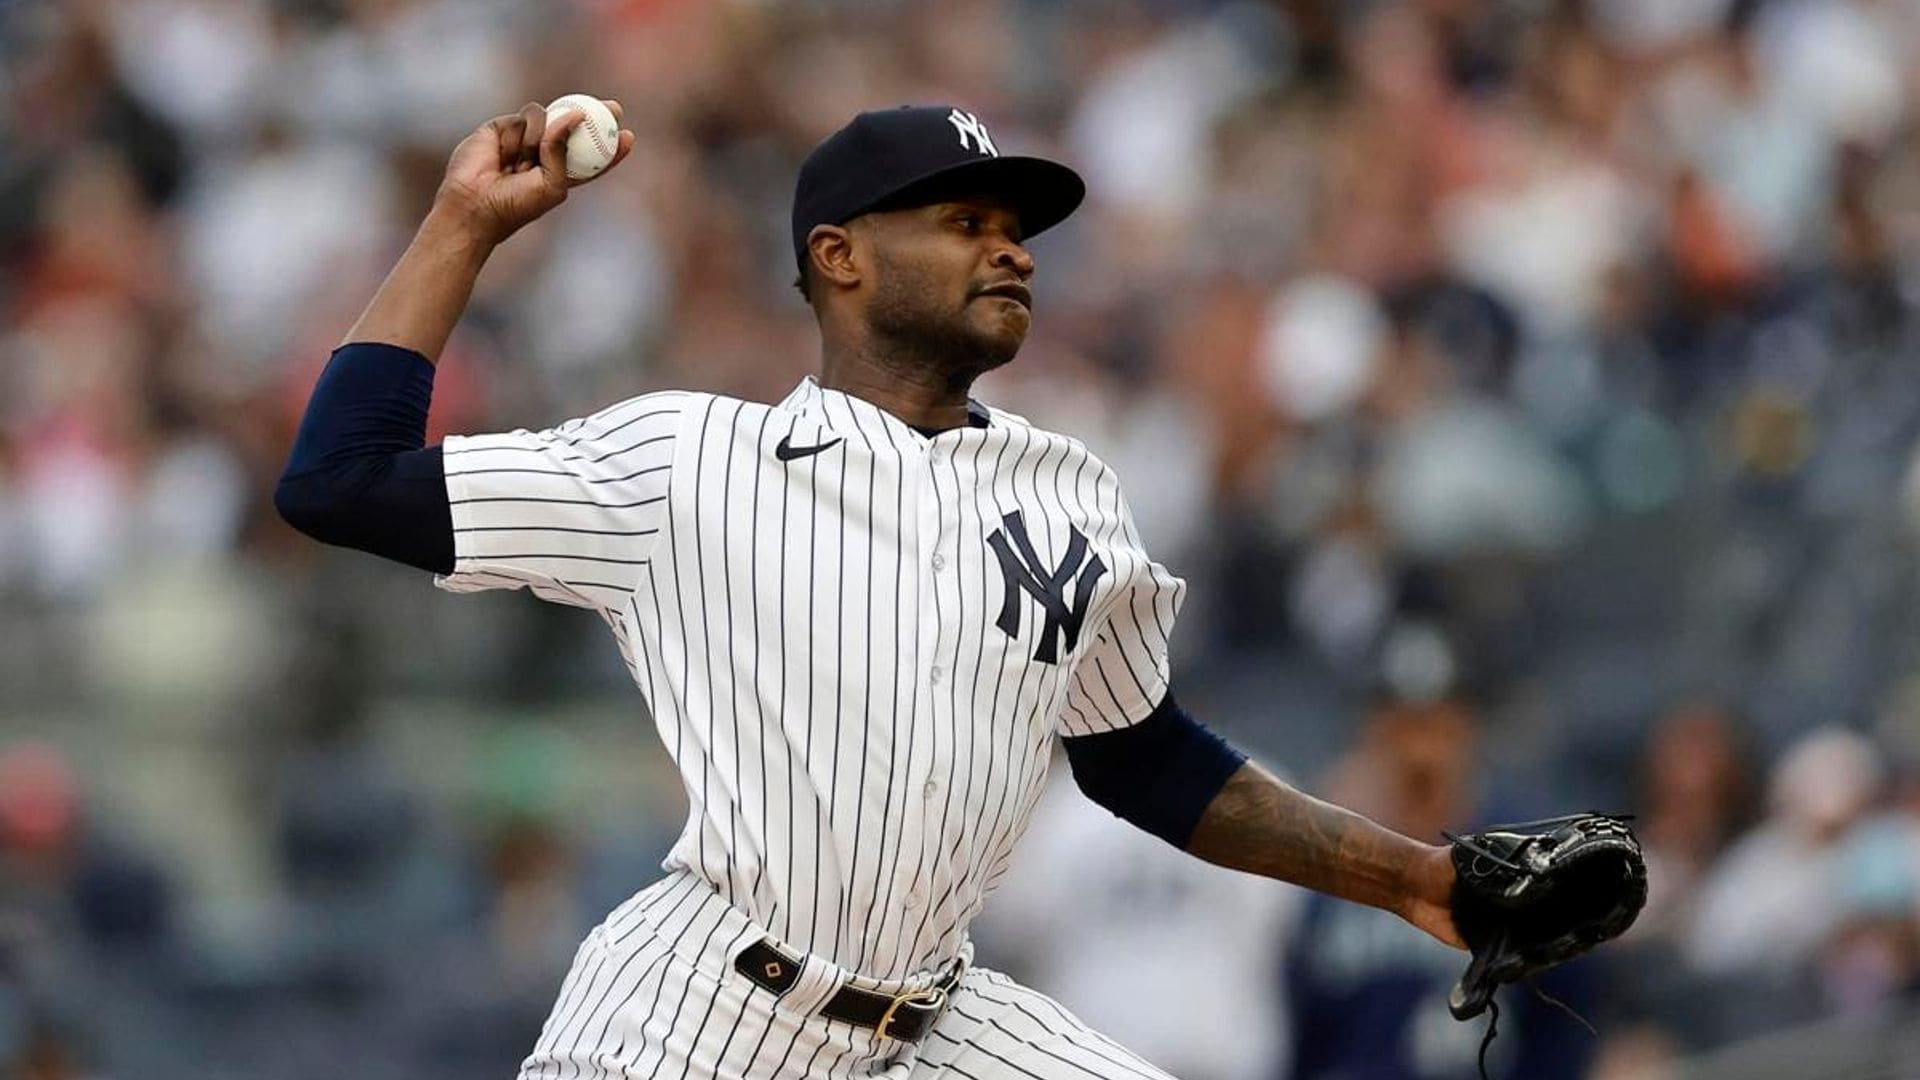 Yankees’ pitcher Domingo Germán makes history with a perfect game in Major League Baseball